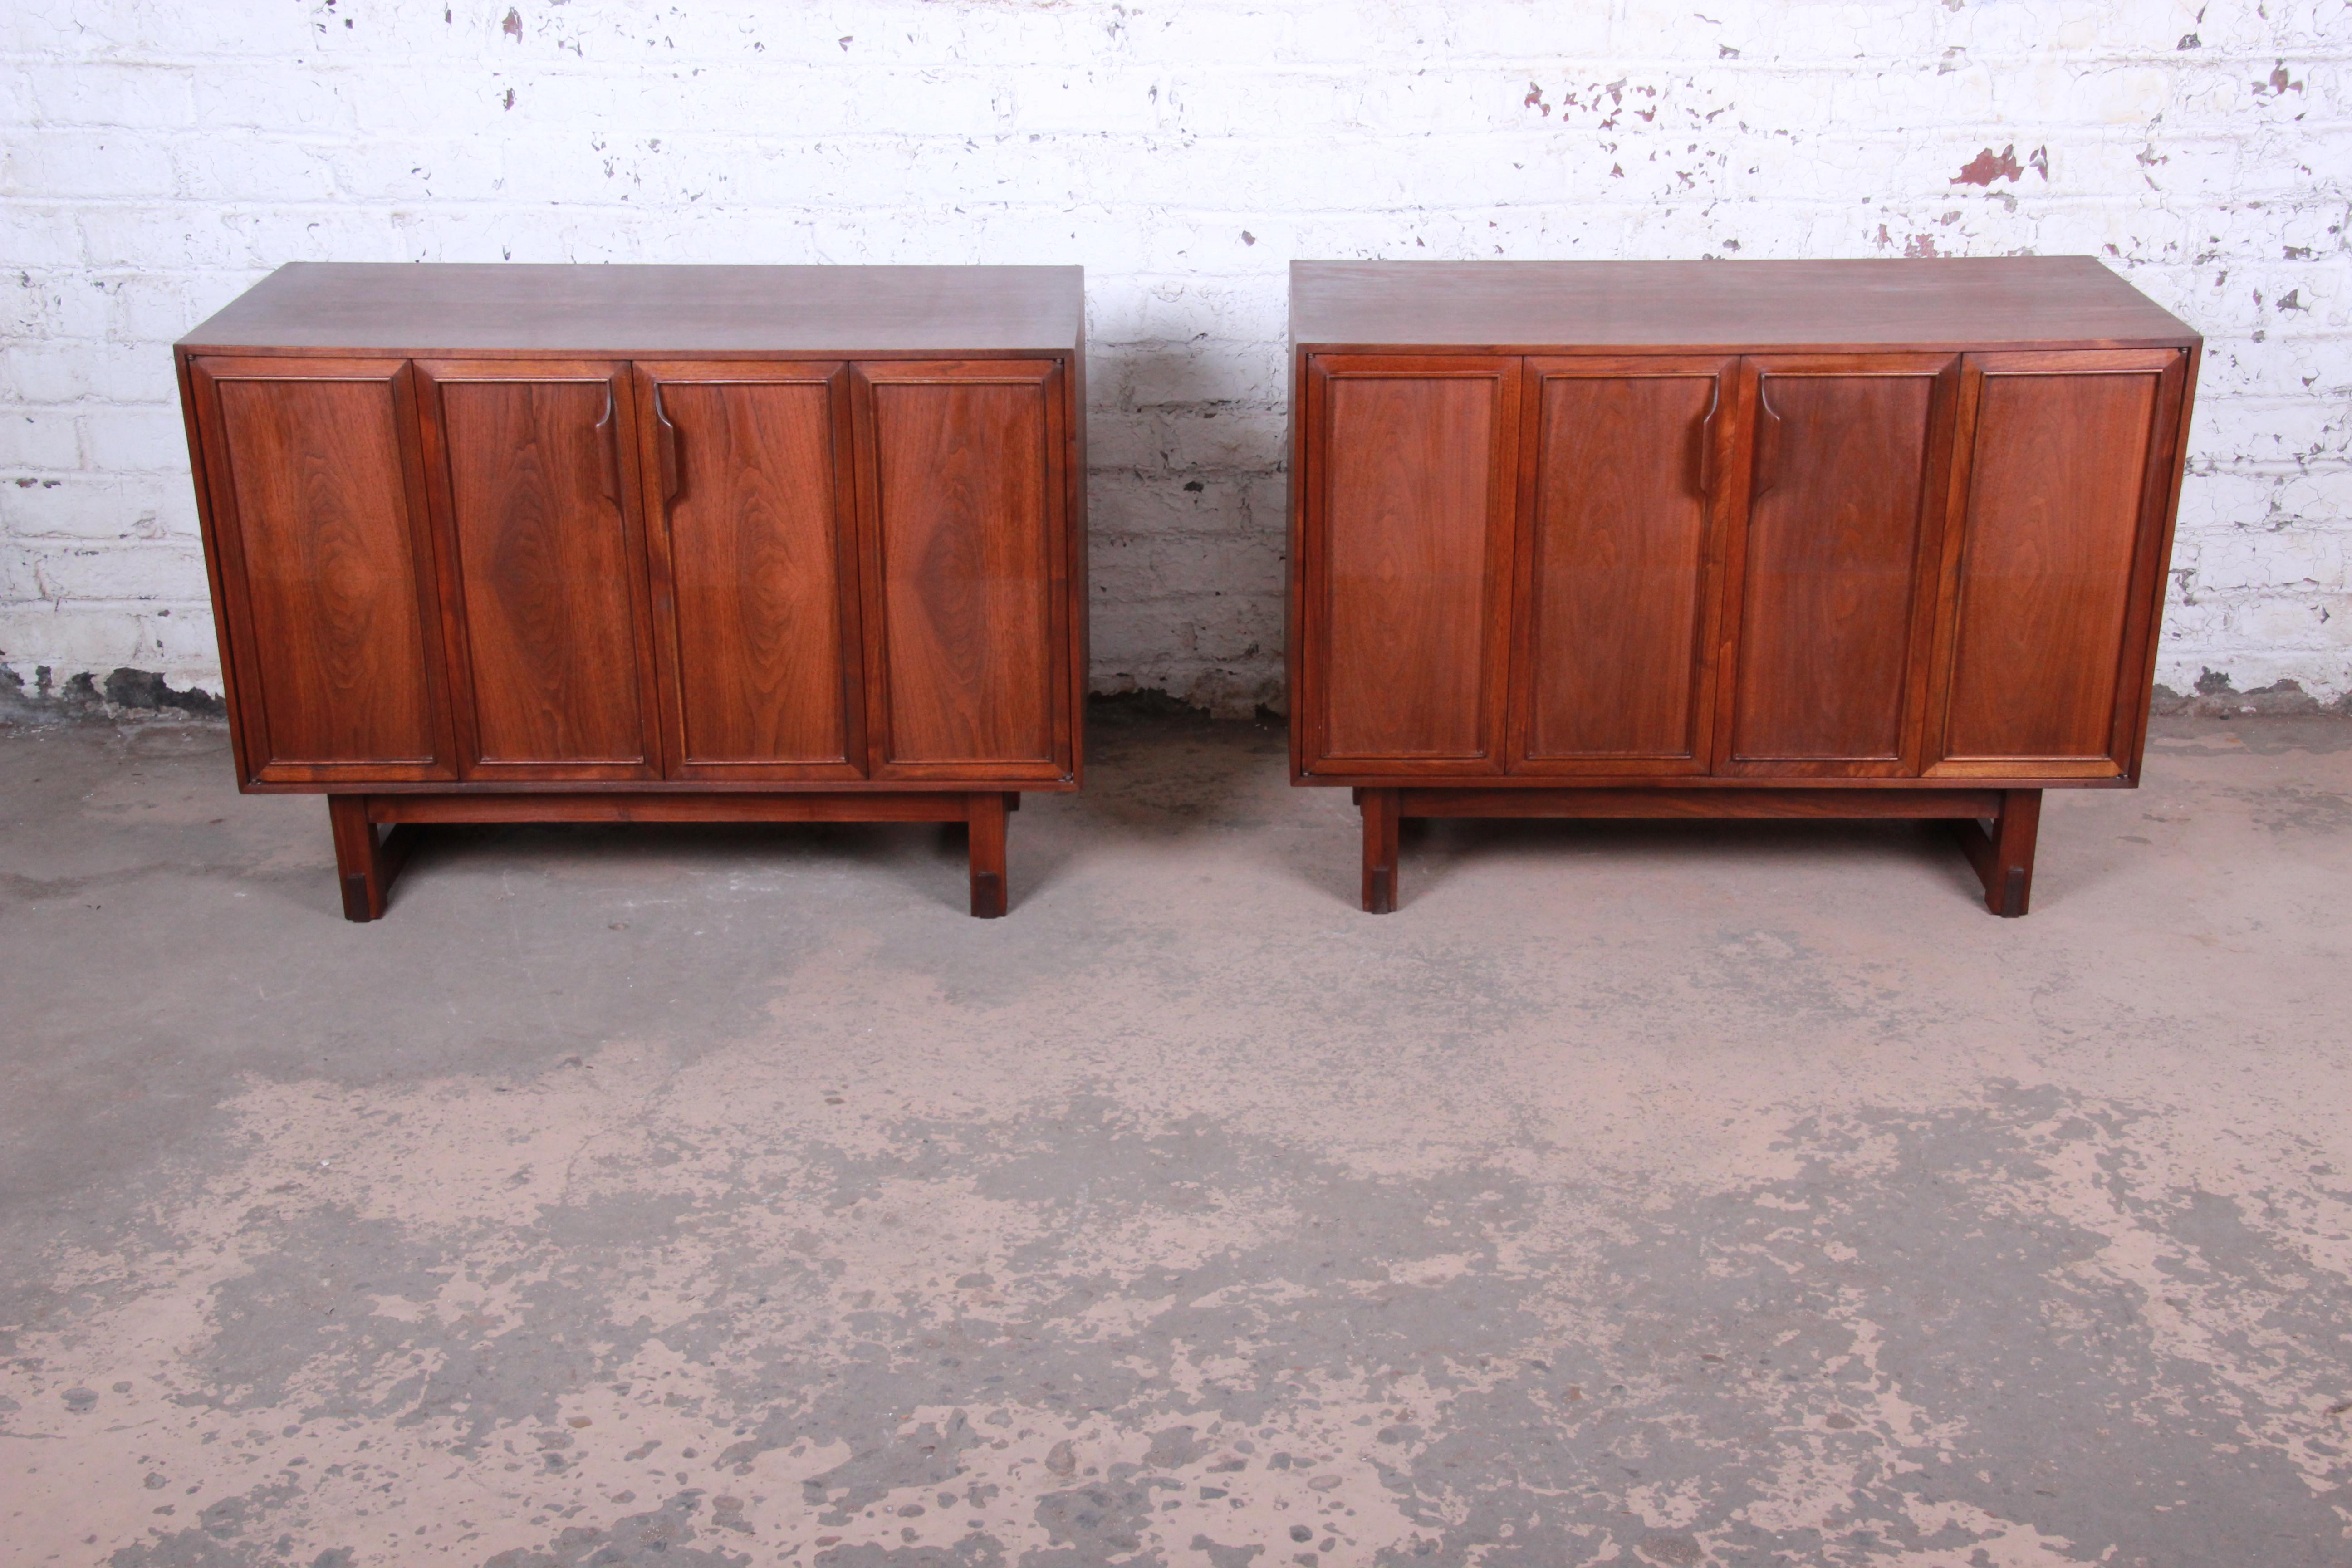 A sleek pair of Mid-Century Modern walnut credenzas or oversized nightstands

Designed by Lawrence Peabody for Richardson Nemschoff

USA, 1960s

Bookmatched walnut and sculpted solid walnut handles and legs

Measures: 41.63